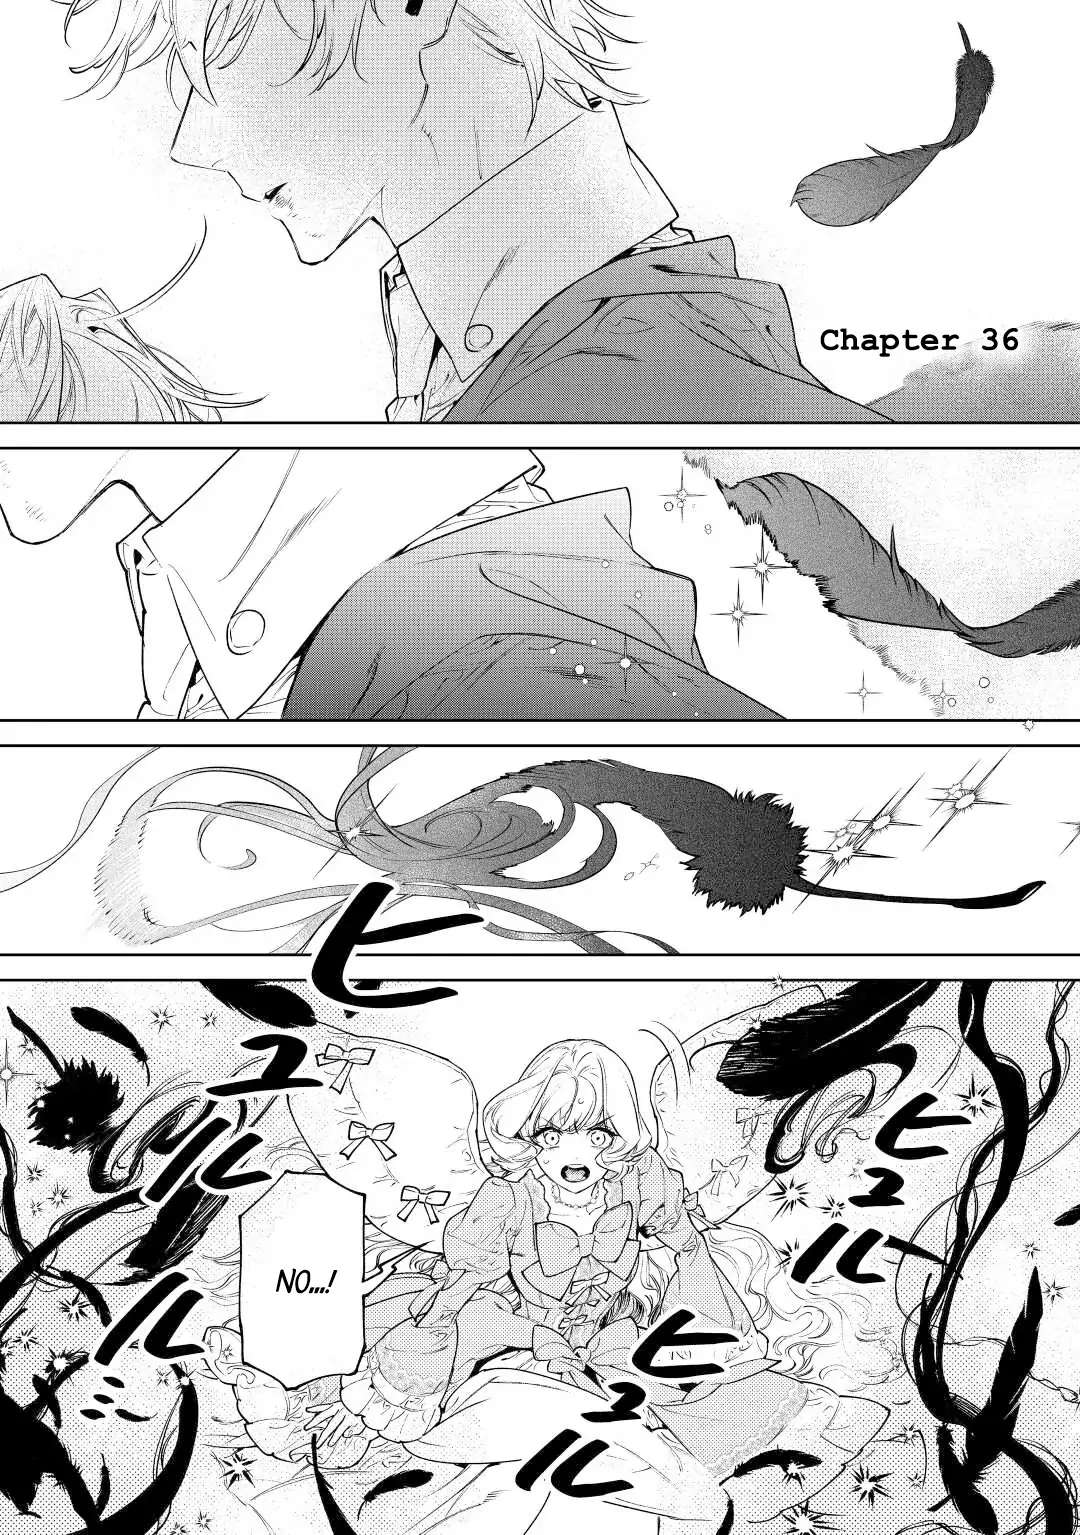 May I Ask For One Final Thing? - 36 page 1-1ed419fd